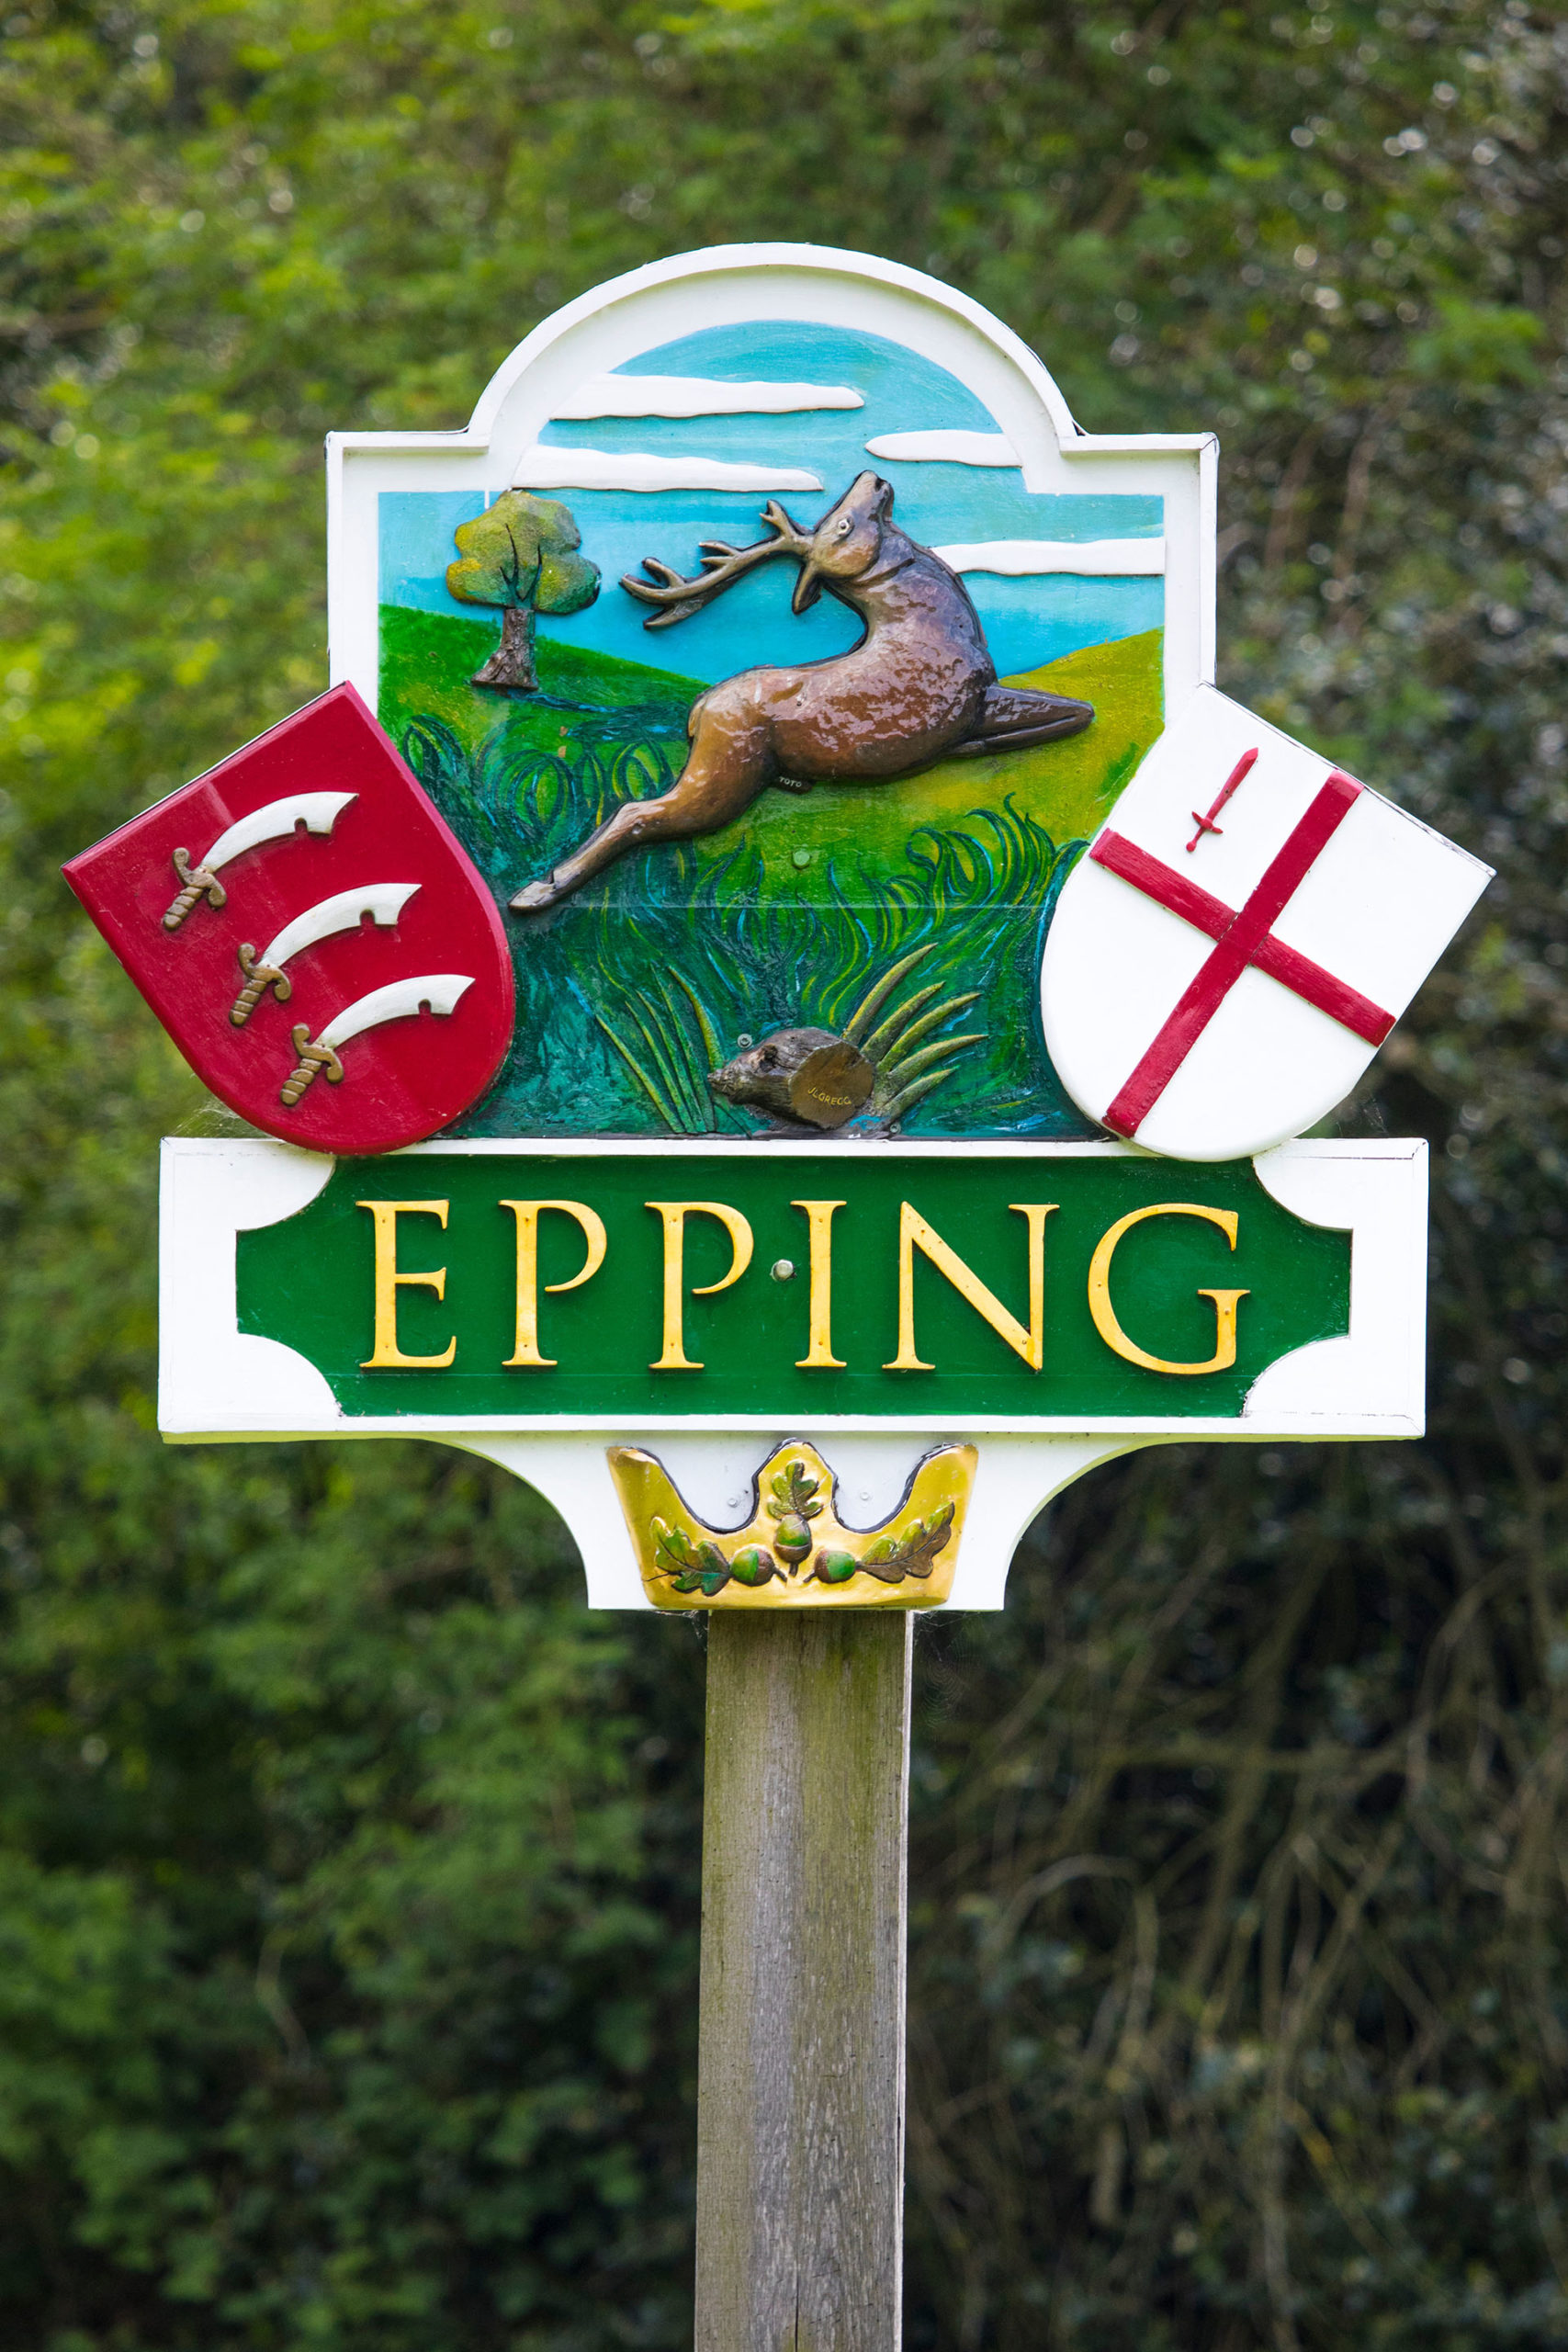 Place-sign of Epping